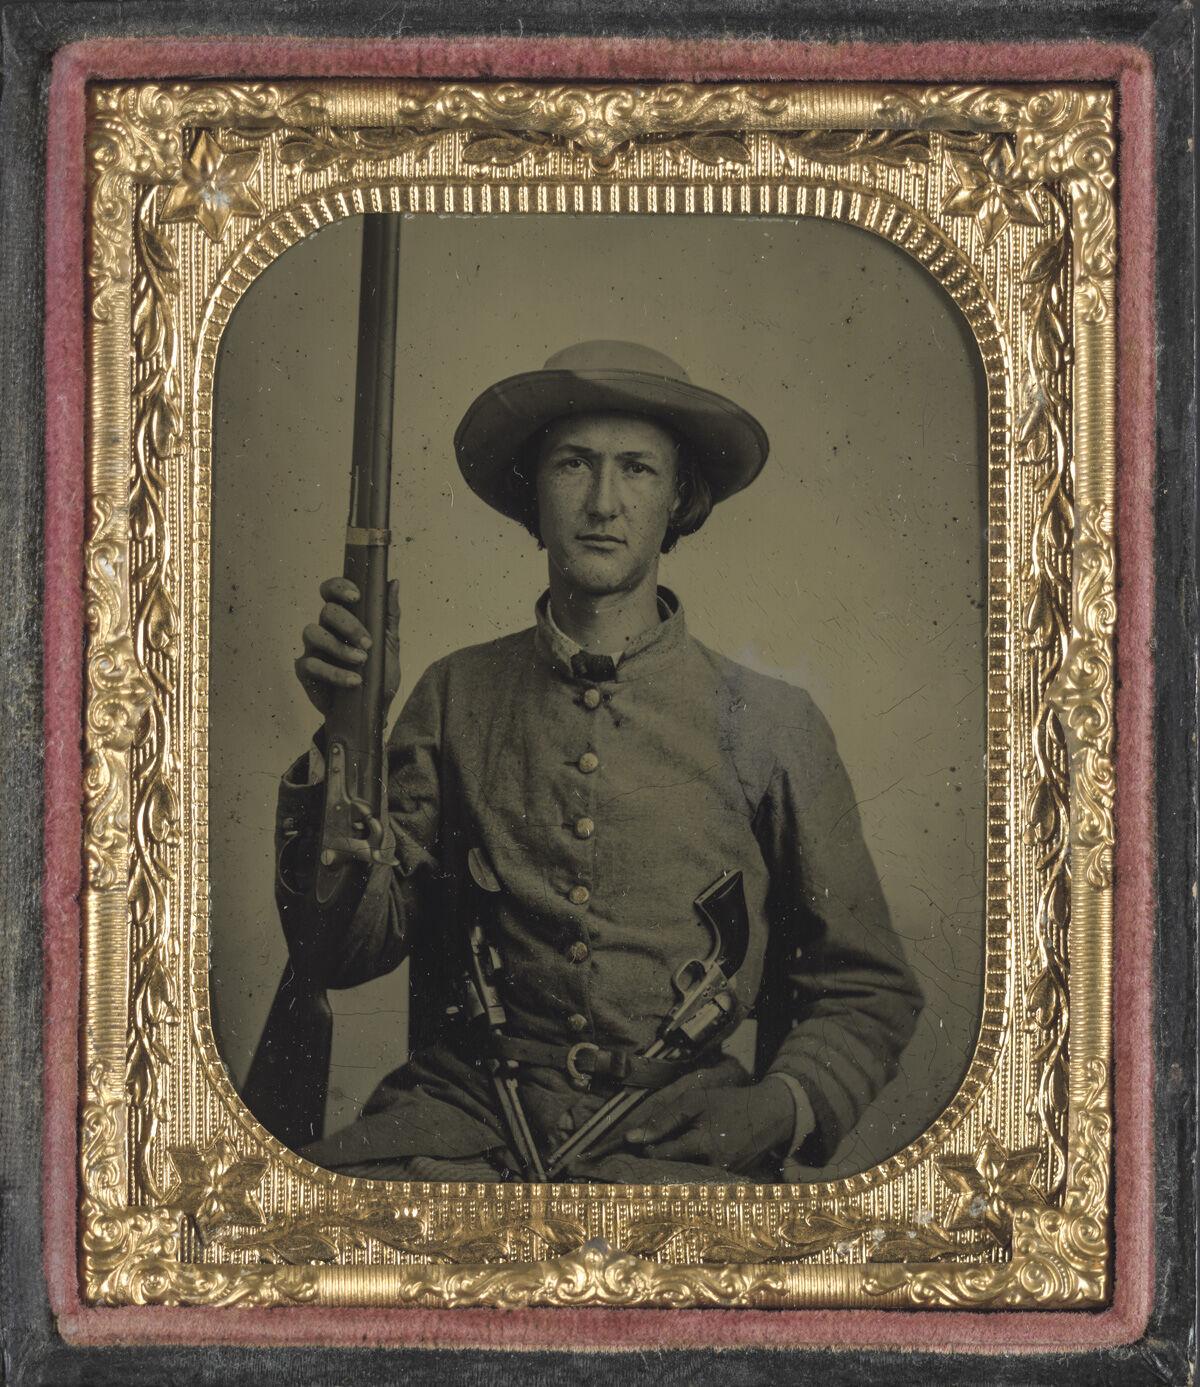 Confederate-infantry-uniform-with-model-1842-musket-and-two-Colt-revolvers.jpg